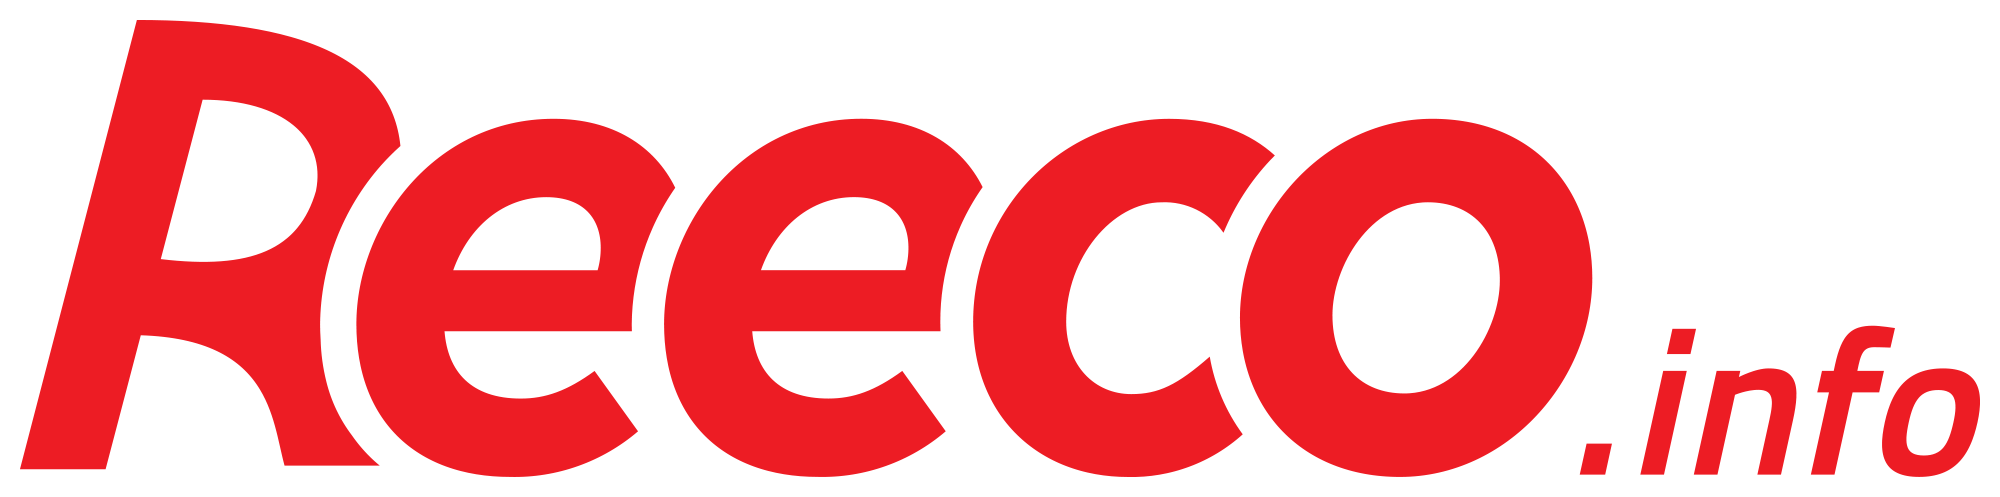 REECO | Electronic components. Distributor, online shop – Transfer ...